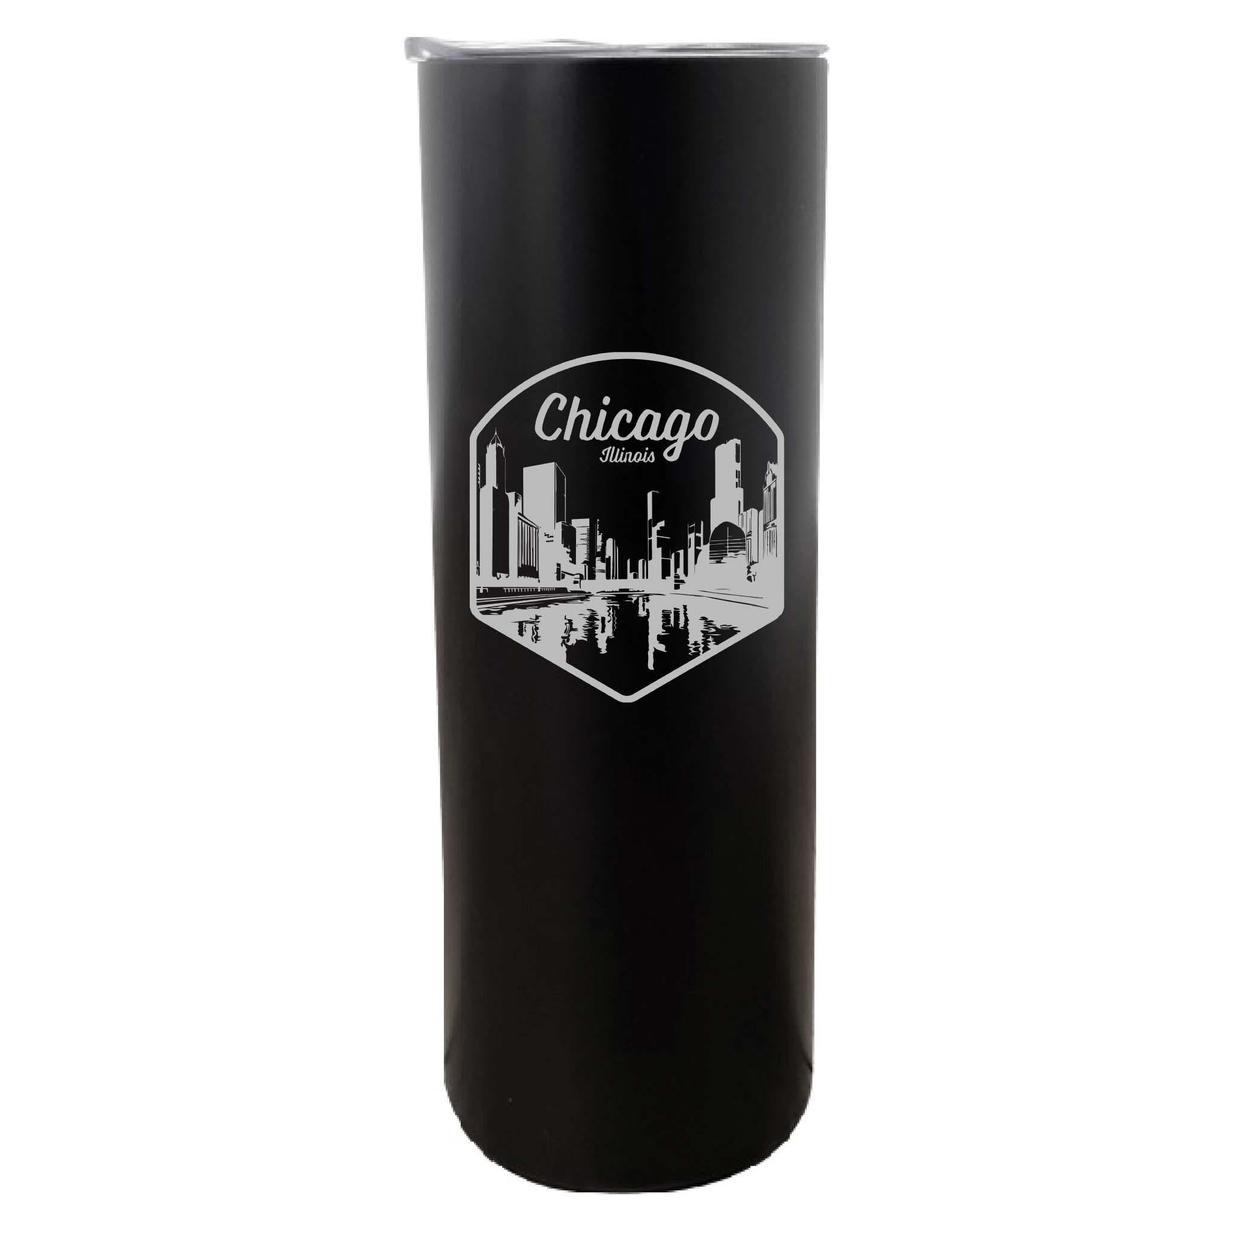 Chicago Illinois Souvenir 20 Oz Engraved Insulated Skinny Tumbler - Navy,,2-Pack